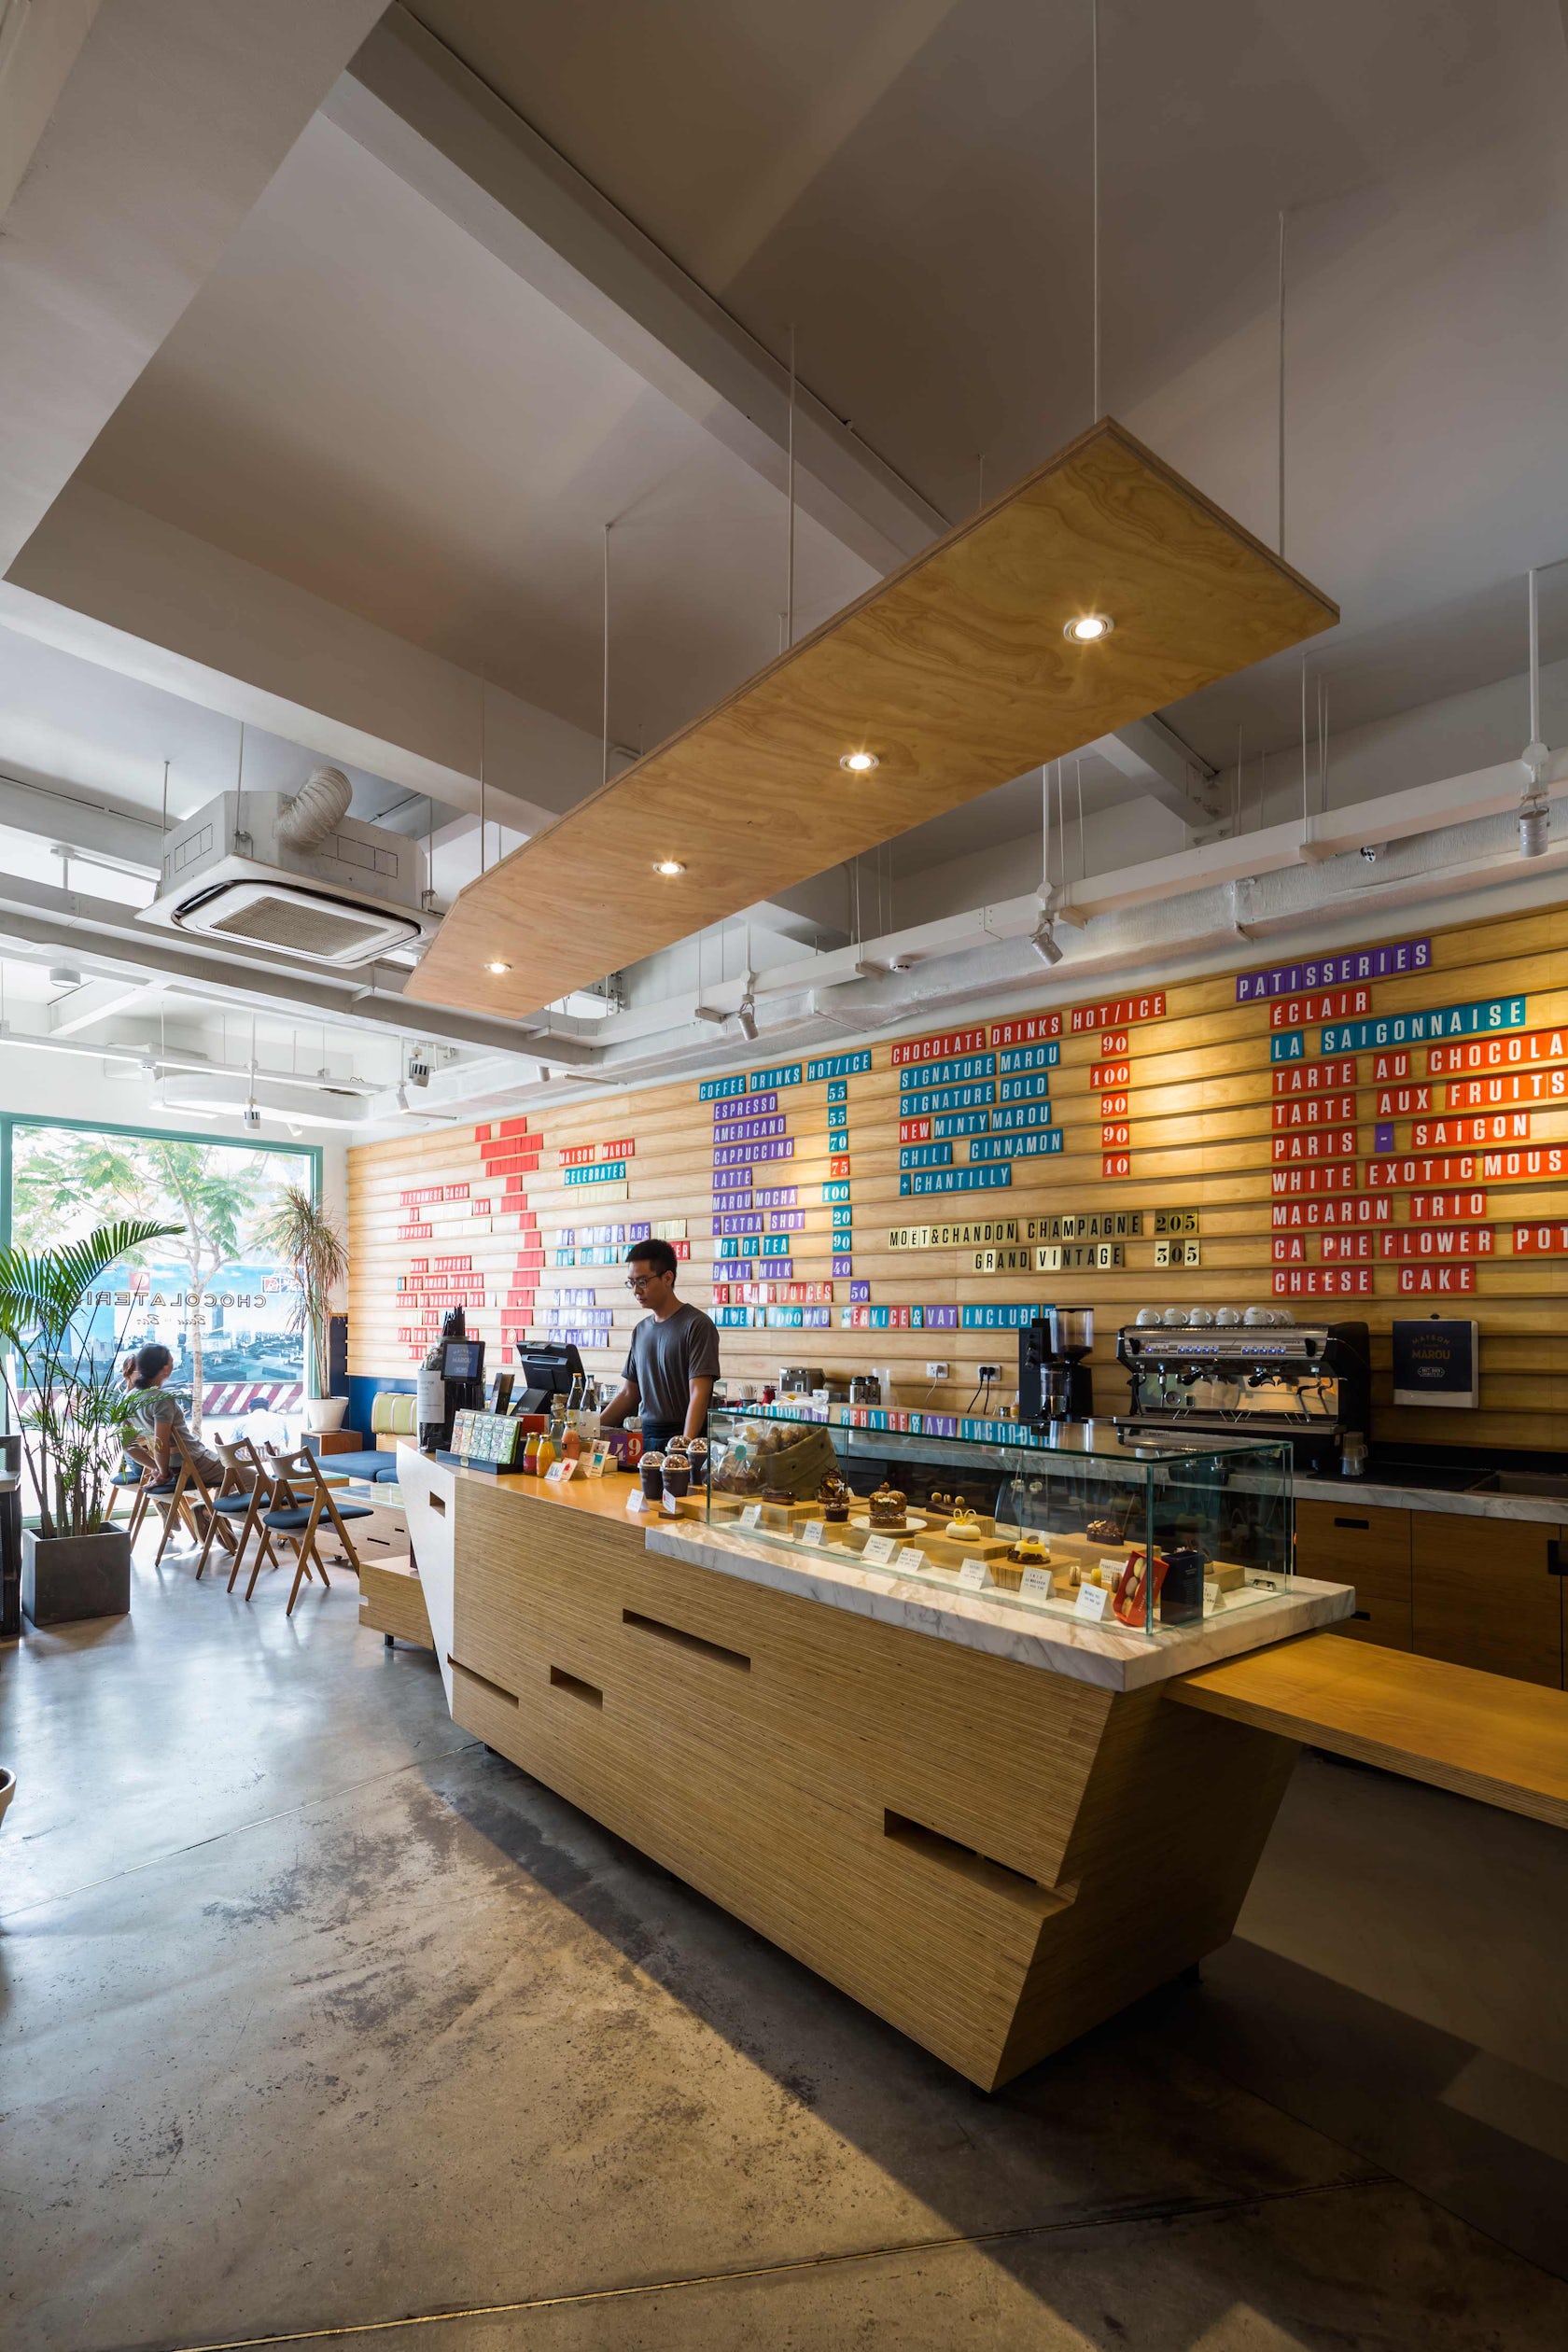 Vietnamese chocolatier Marou sets sights on cafe concept's regional  expansion - Retail in Asia